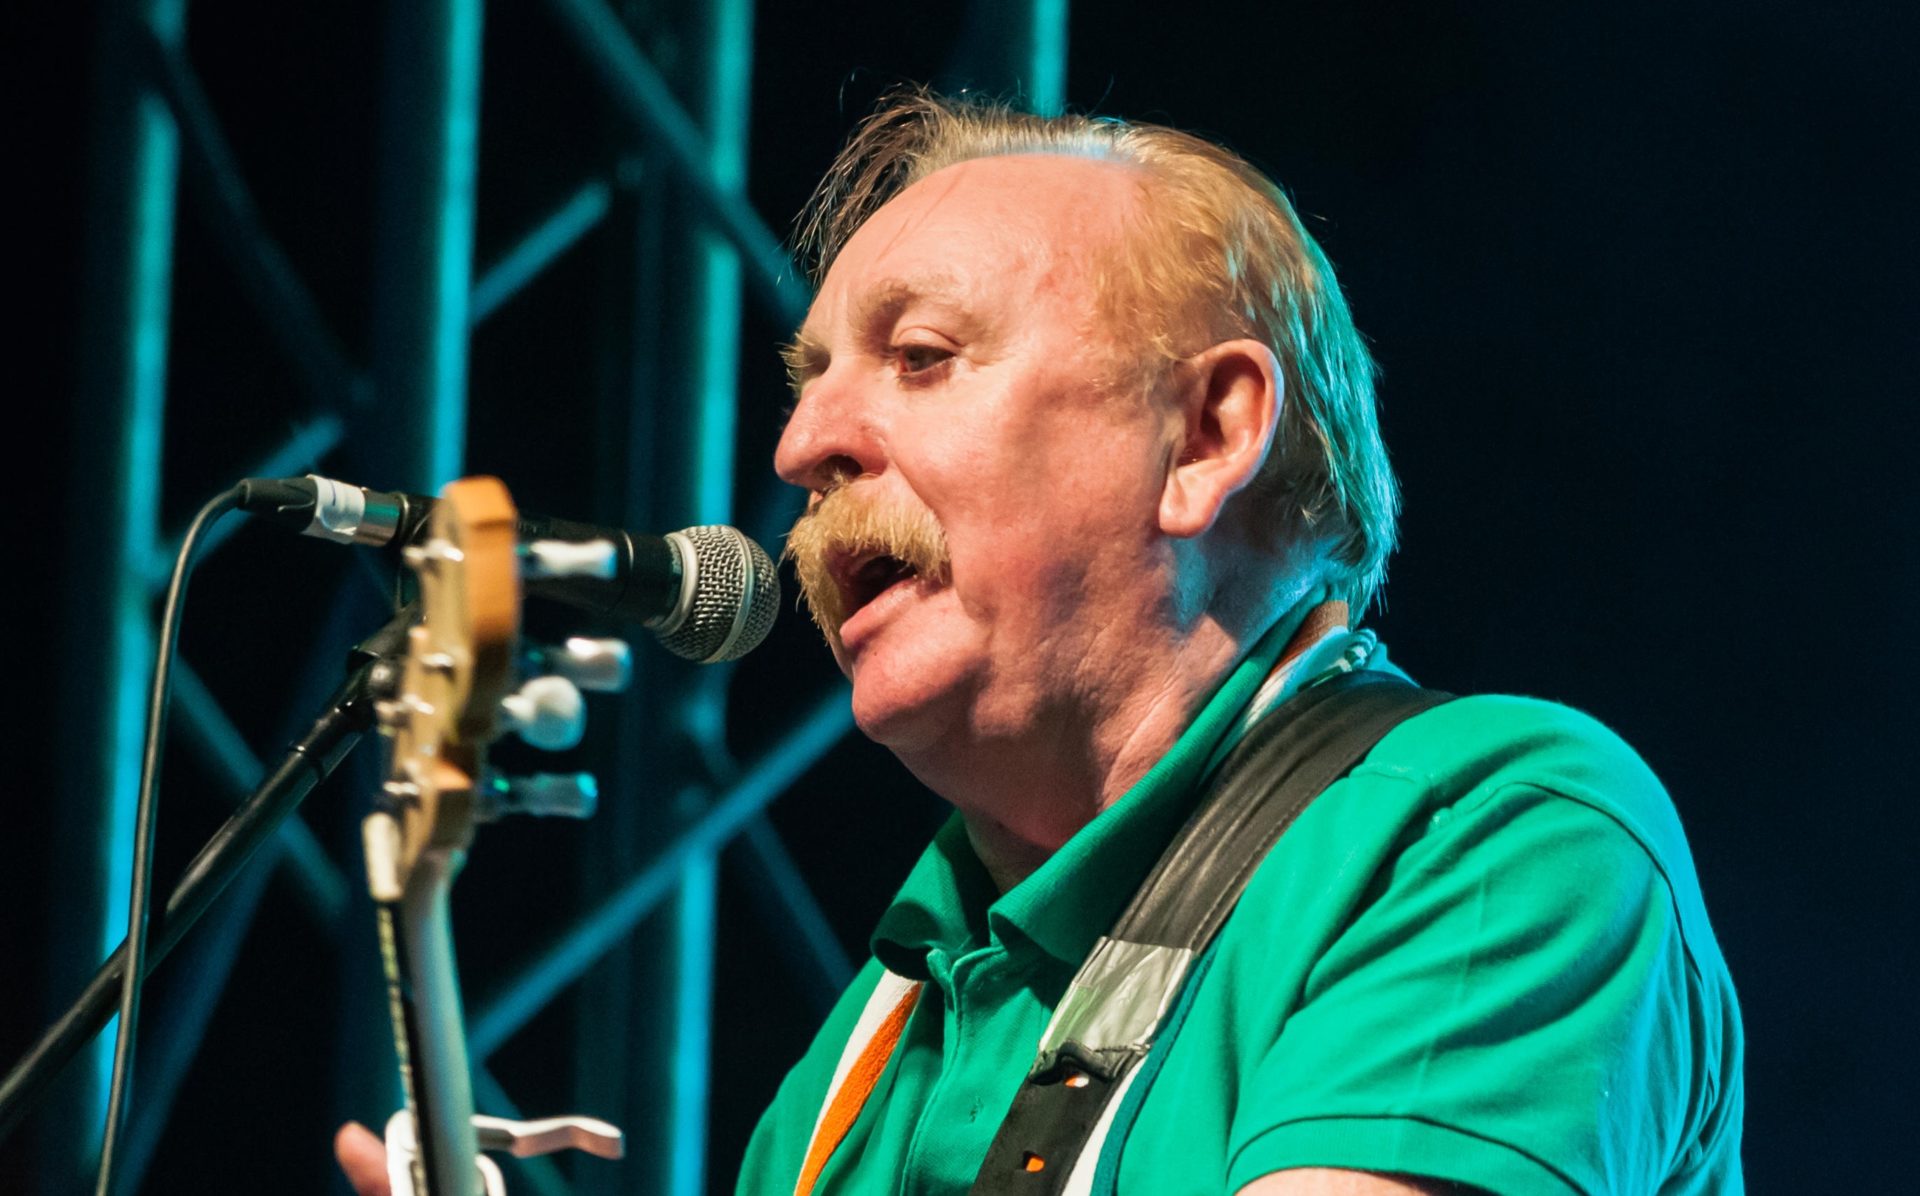 Brian Warfield from 'The Wolfe Tones' performs in Belfast, Northern Ireland in August 2015